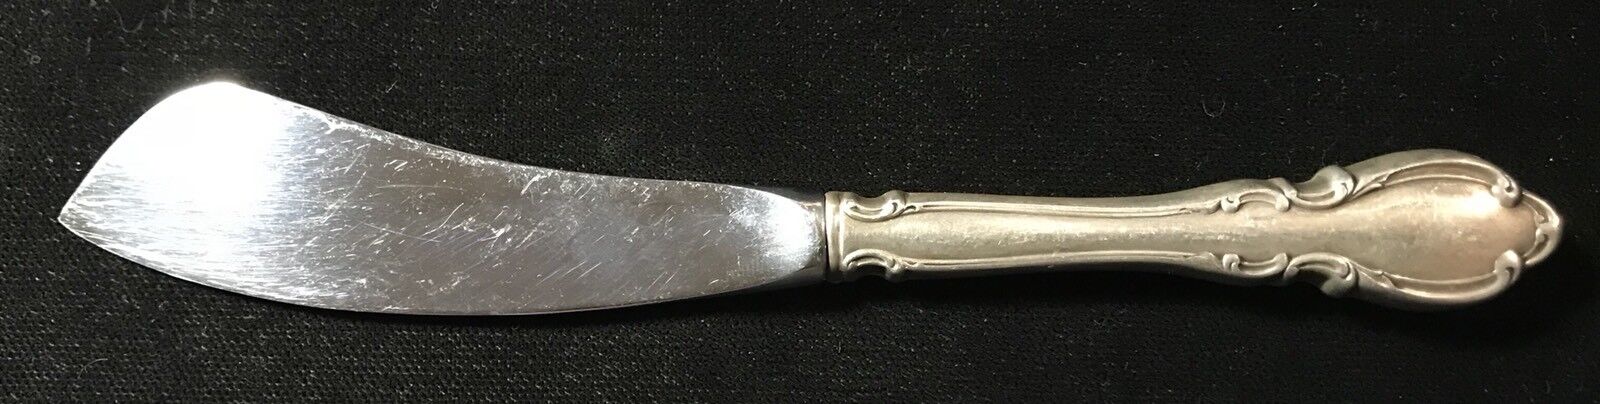 Sterling Silver Flatware - Towle Legato Master Butter Hollow Handle